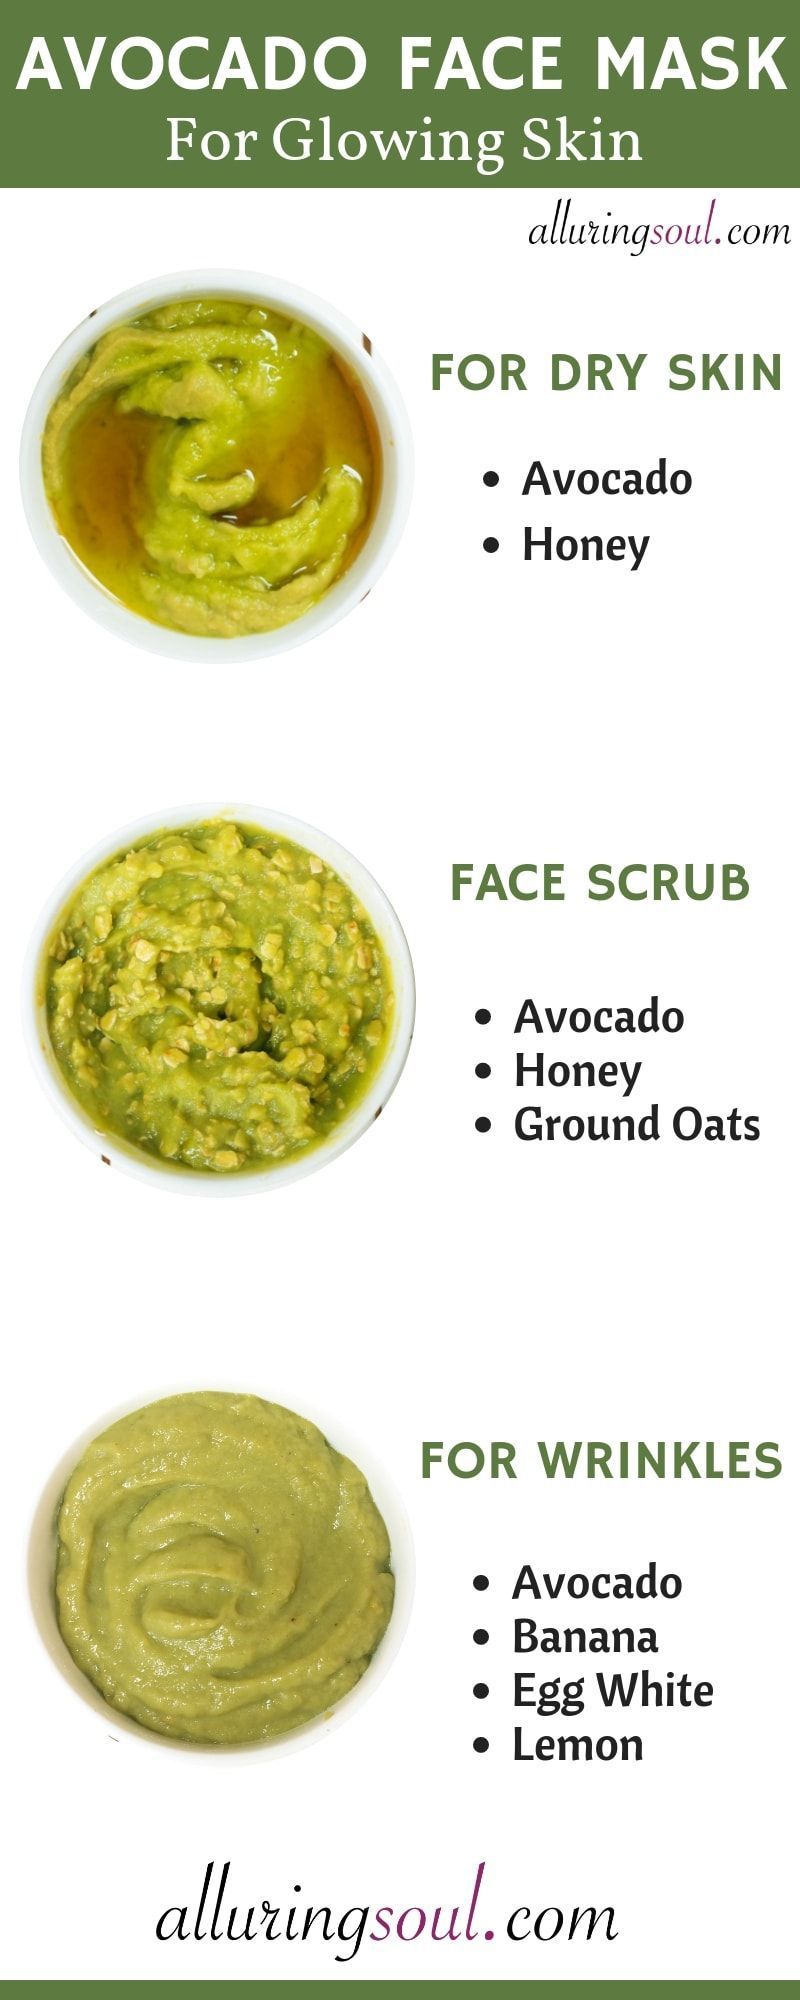 3 DIY Avocado Face Mask For Dry, Aging & Dull Skin | Alluring Soul - 3 DIY Avocado Face Mask For Dry, Aging & Dull Skin | Alluring Soul -   15 diy Face Mask for pimples ideas